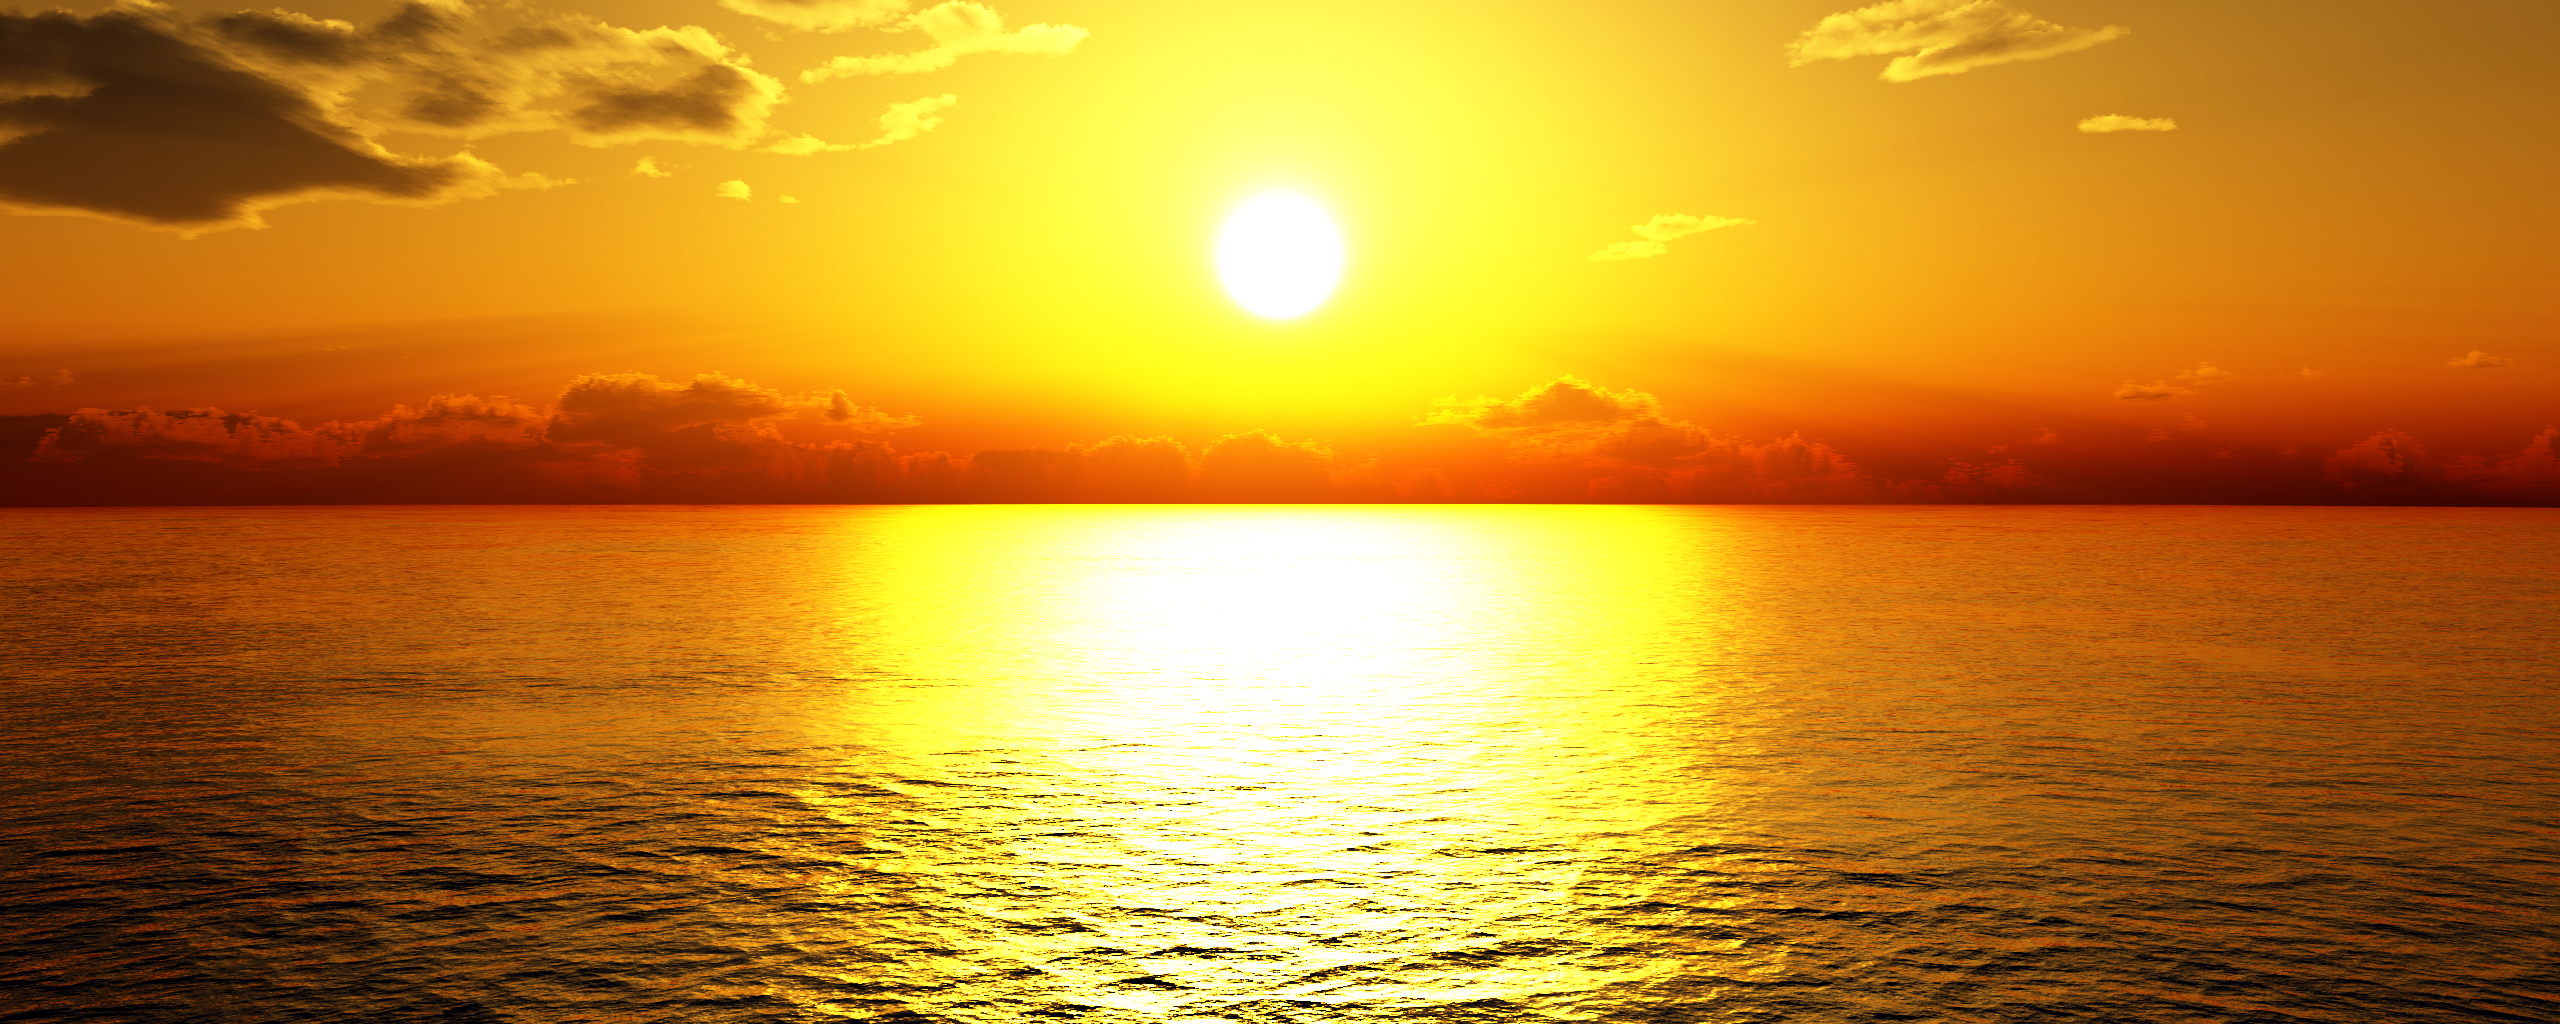 Sun Setting Over Water by aphexii on DeviantArt